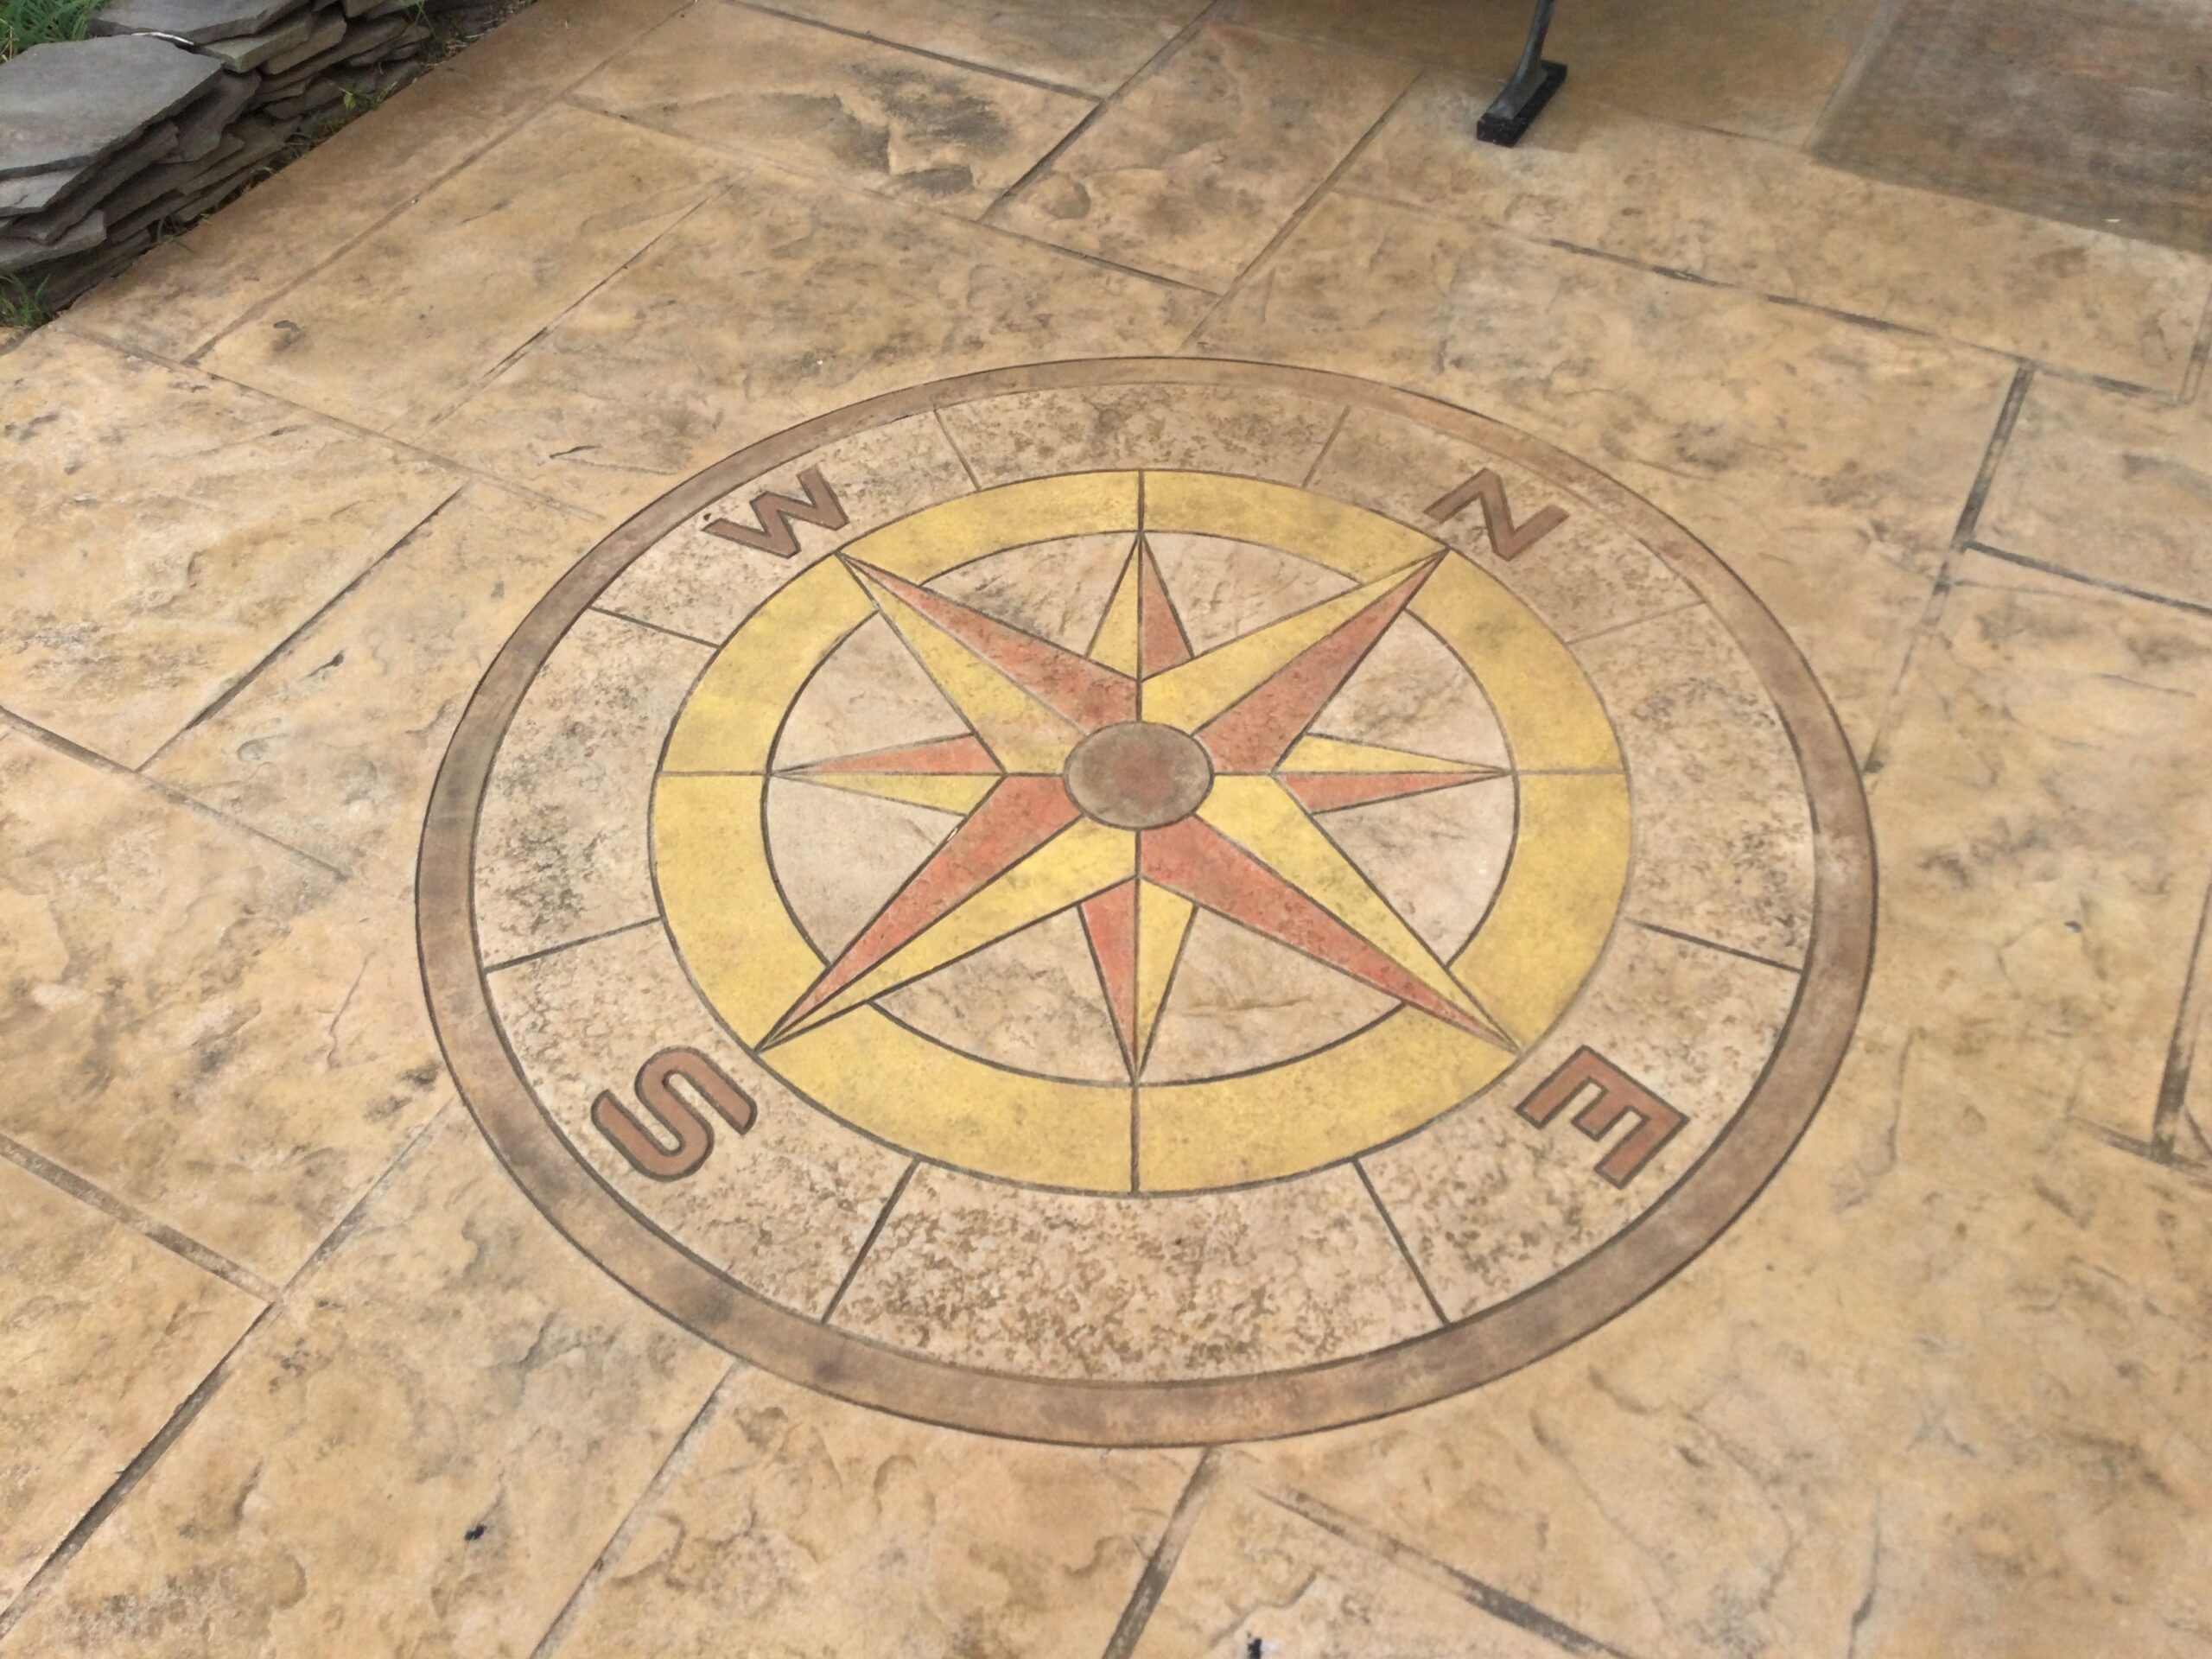 The faded stamped compass rose on the concrete driveway, barely visible due to weathering